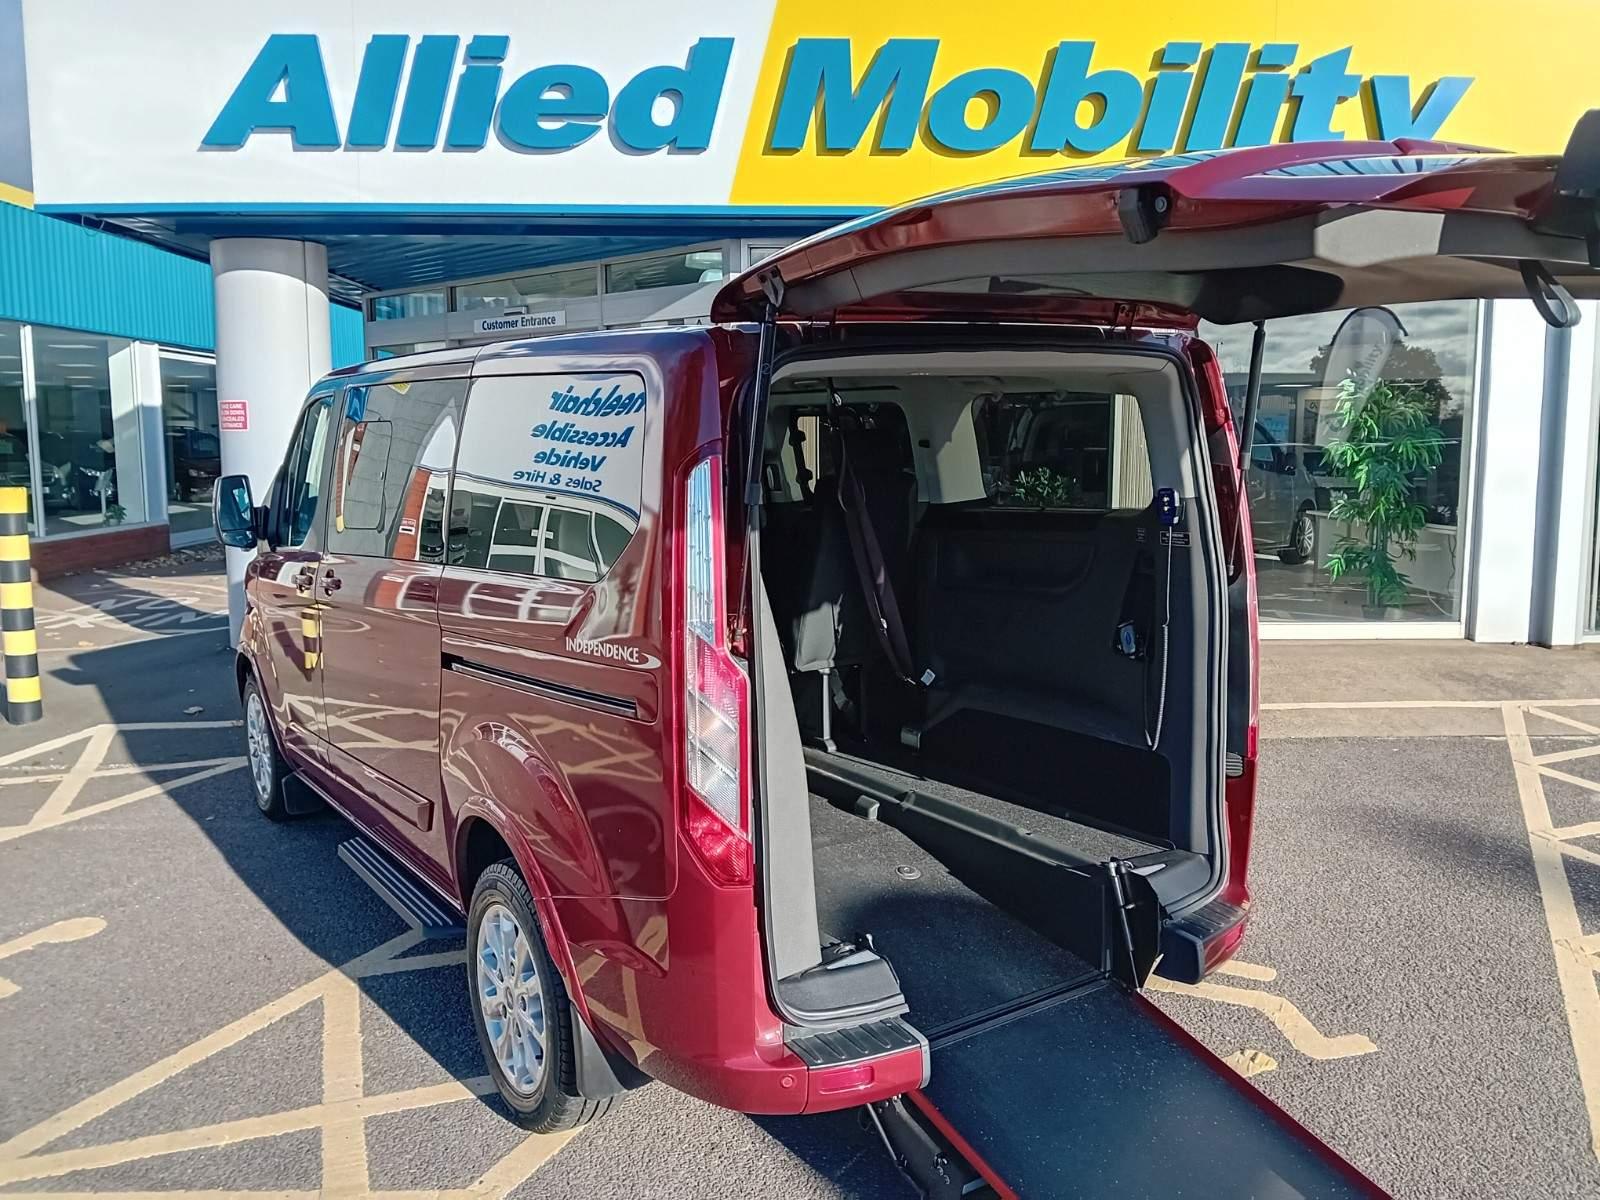 Allied Mobility | Car dealership in Coventry | AutoTrader